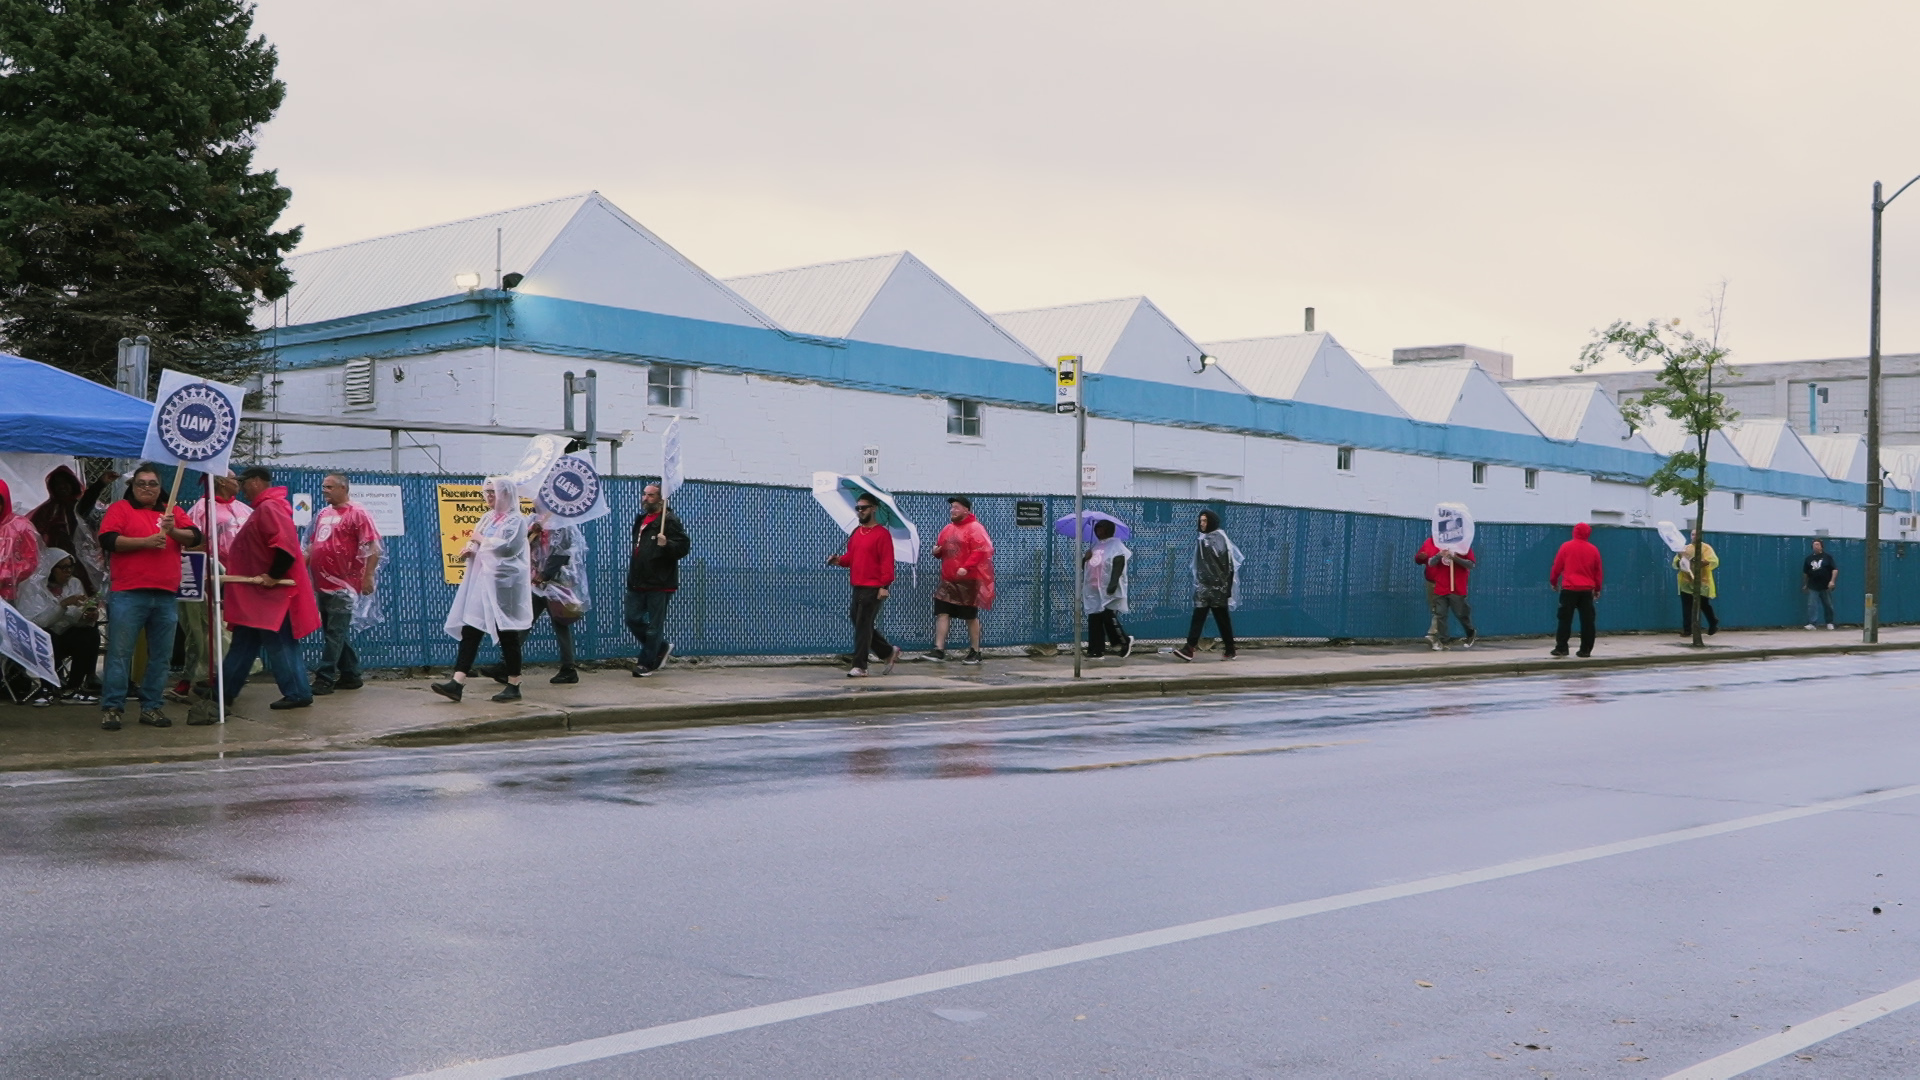 People wearing ponchos and raincoats and carrying umbrellas and signs with the United Auto Workers gear logo walk along a sidewalk, with a rain-slicked street in the foreground, and a chain-link fence with privacy slats and topped with barbed wire in front of a building with a saw-tooth roof in the background.